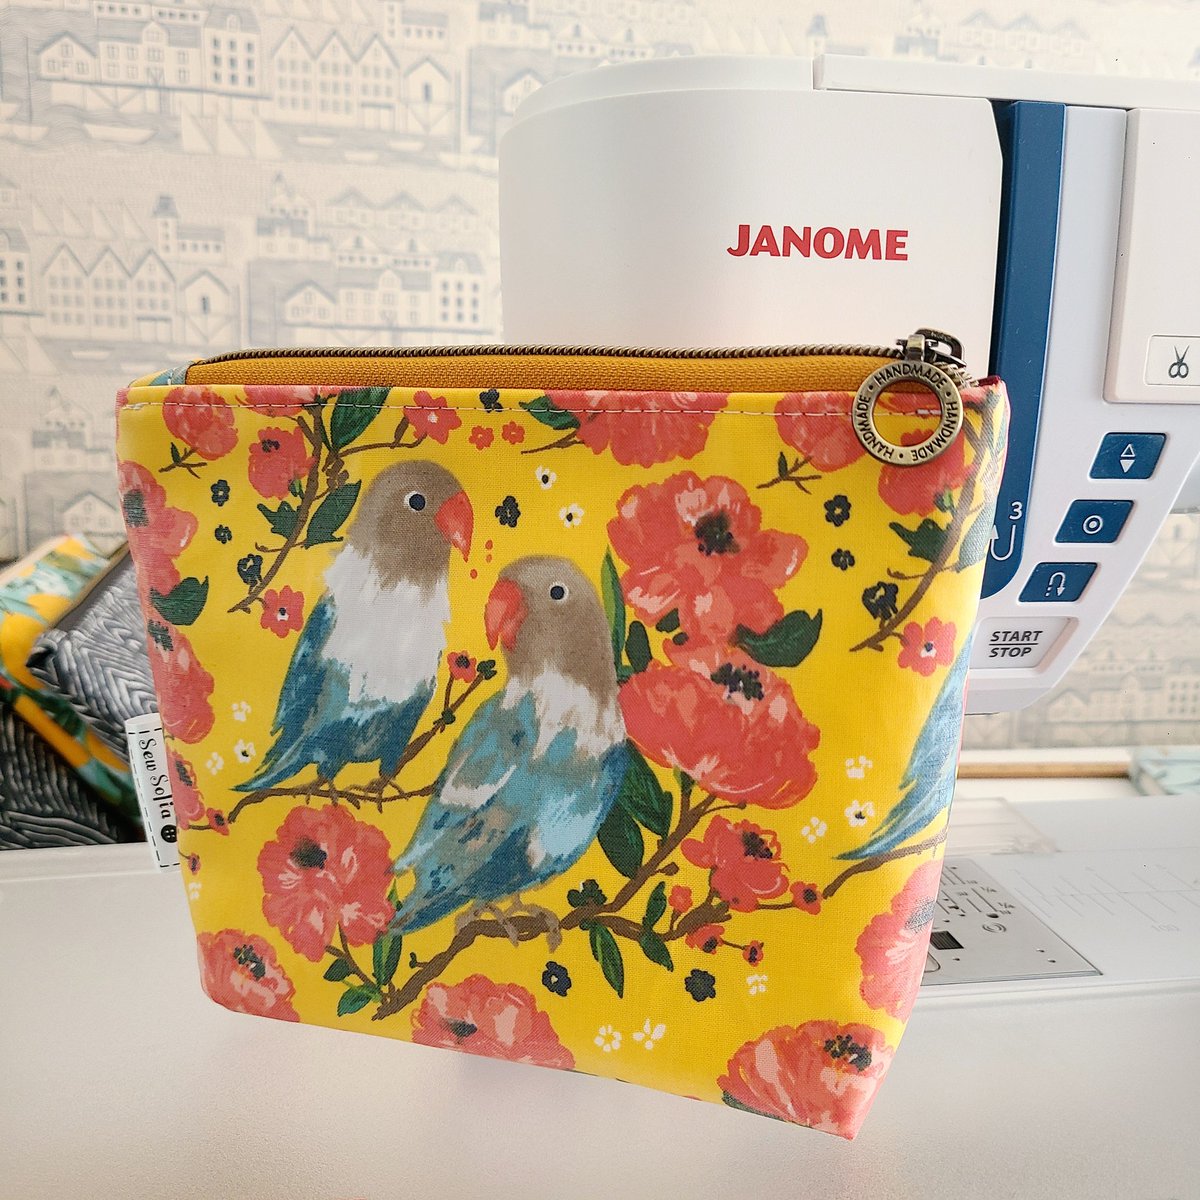 Love Birds 🐦 🩷 bold, colourful and waterproof too, new make up bags in laminated organic cotton coming with me to the @AttenboroughAC Craft & Art Fair on 27th April. #Leicester #Leicestershiremaker #madeinleicestershire #Janome